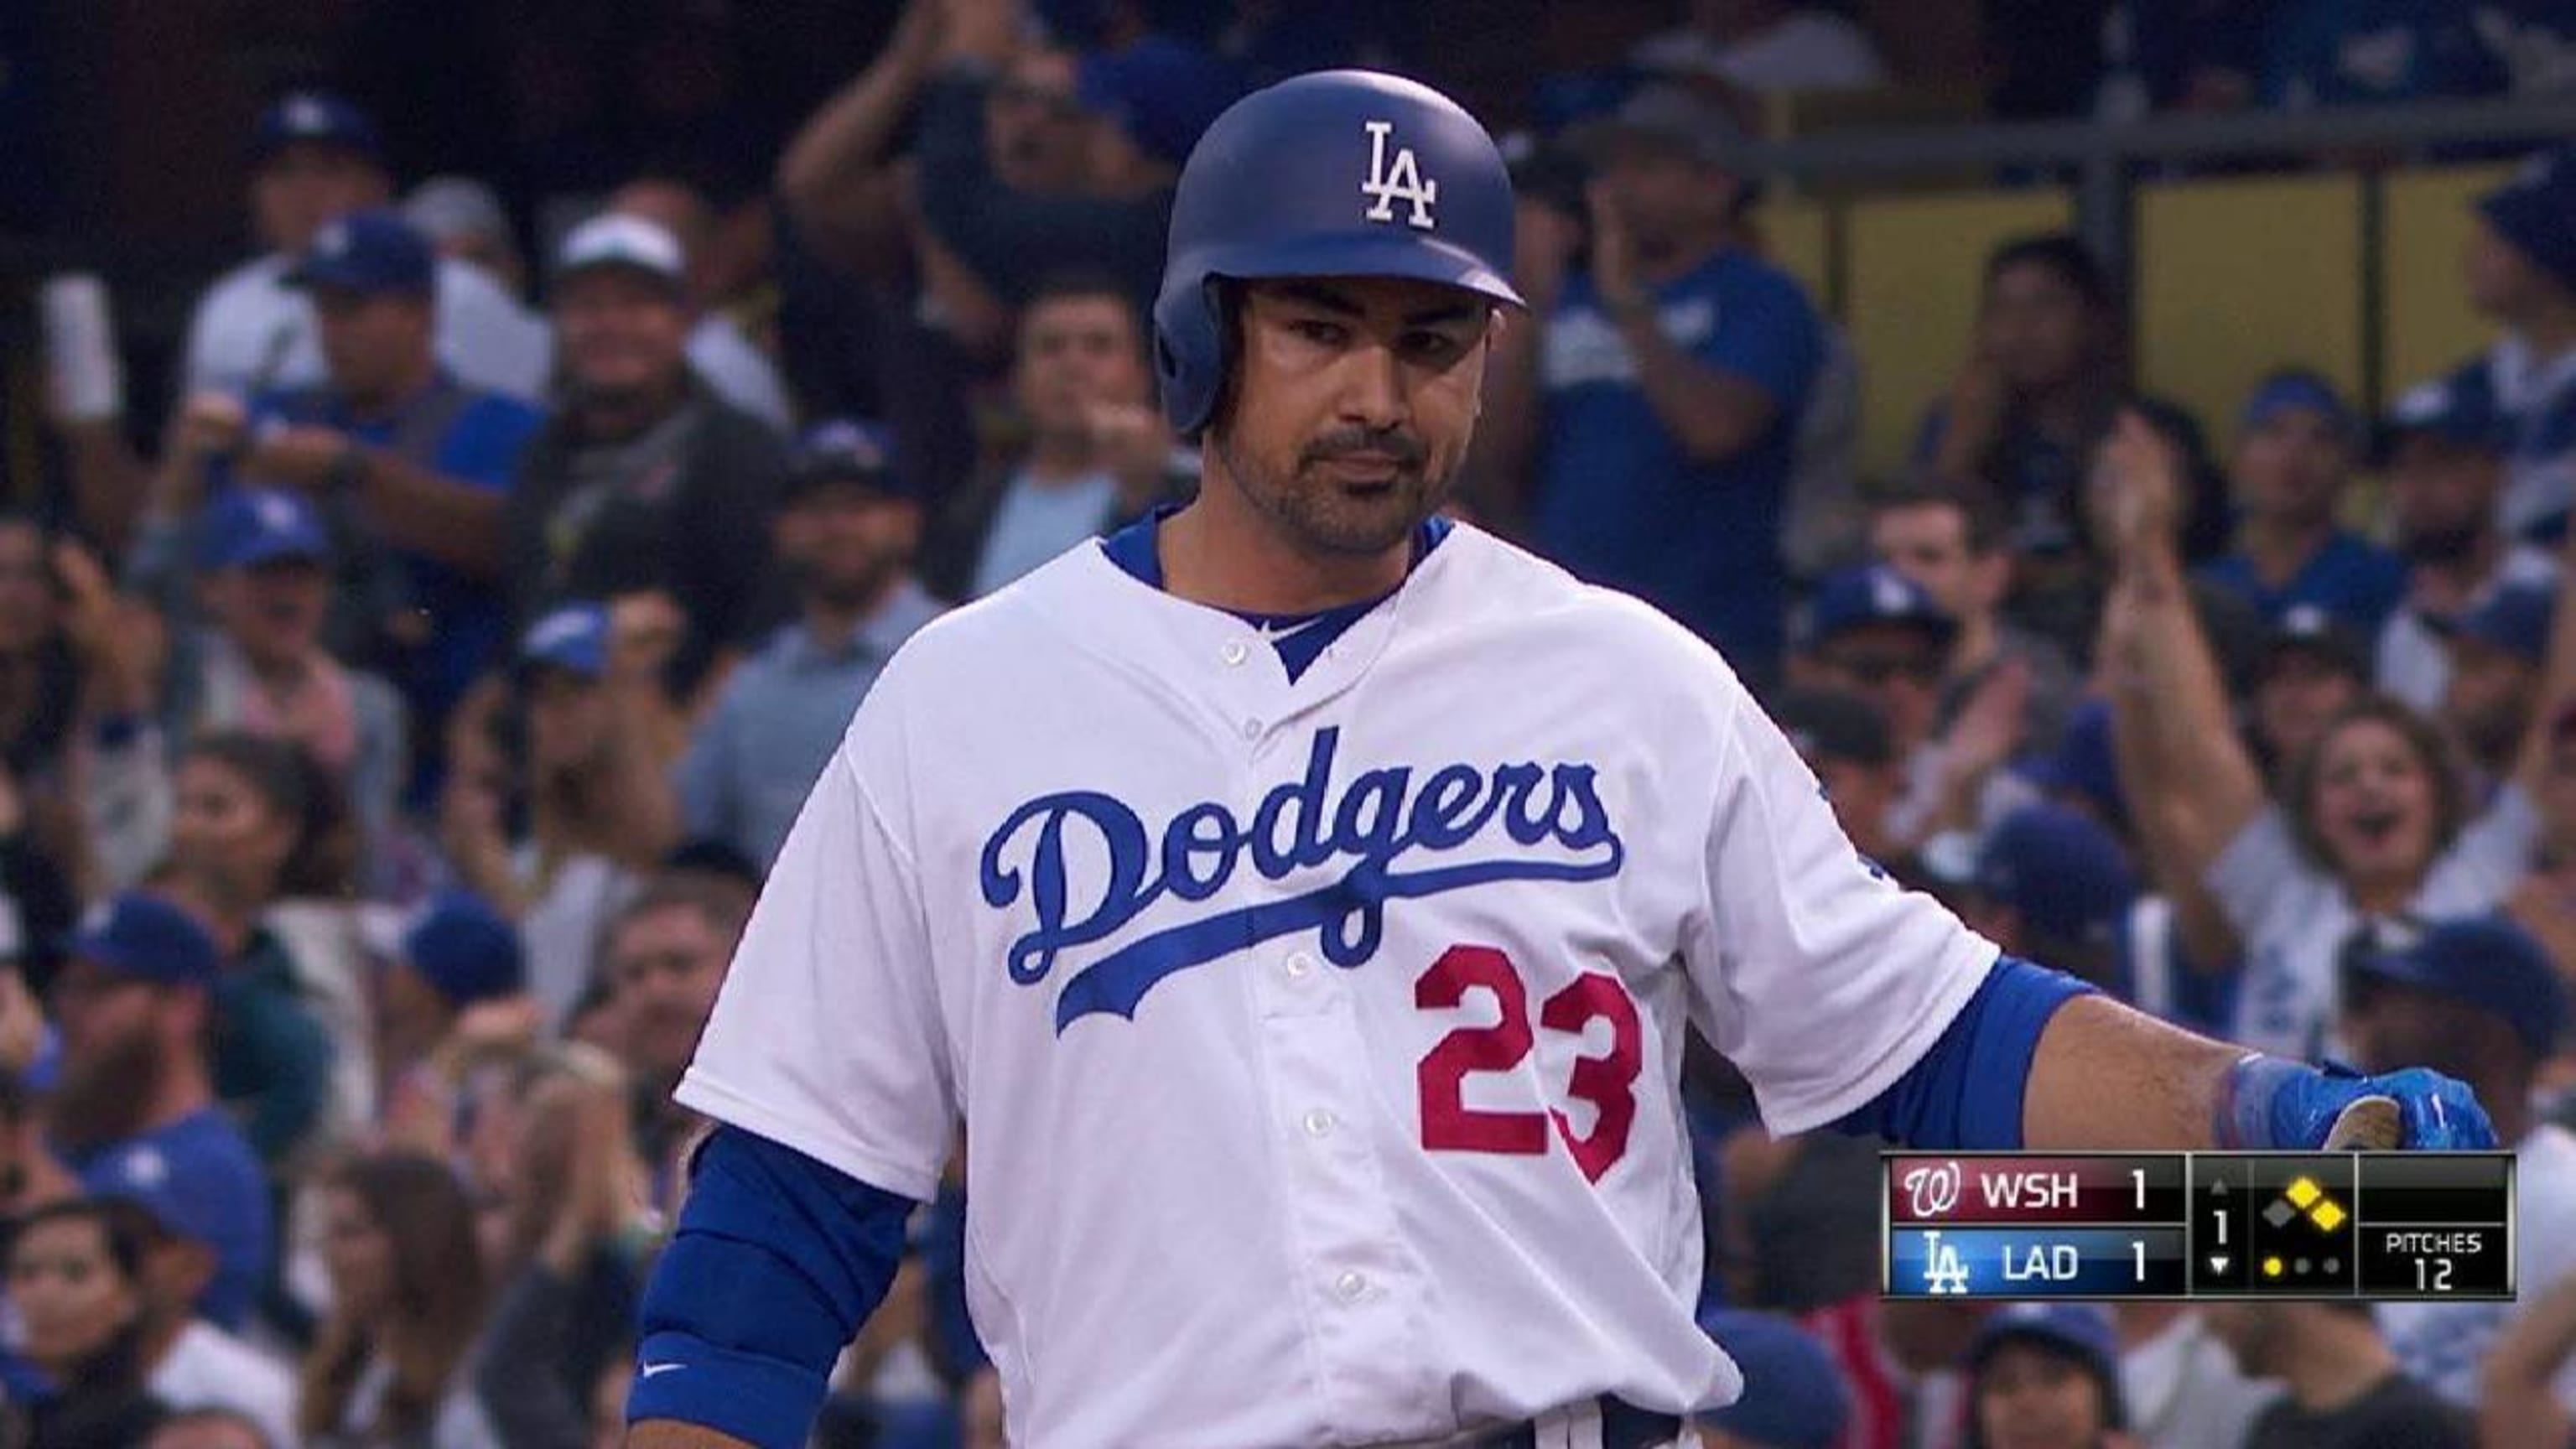 UPDATE: Padres, Red Sox agree on Adrian Gonzalez trade - NBC Sports